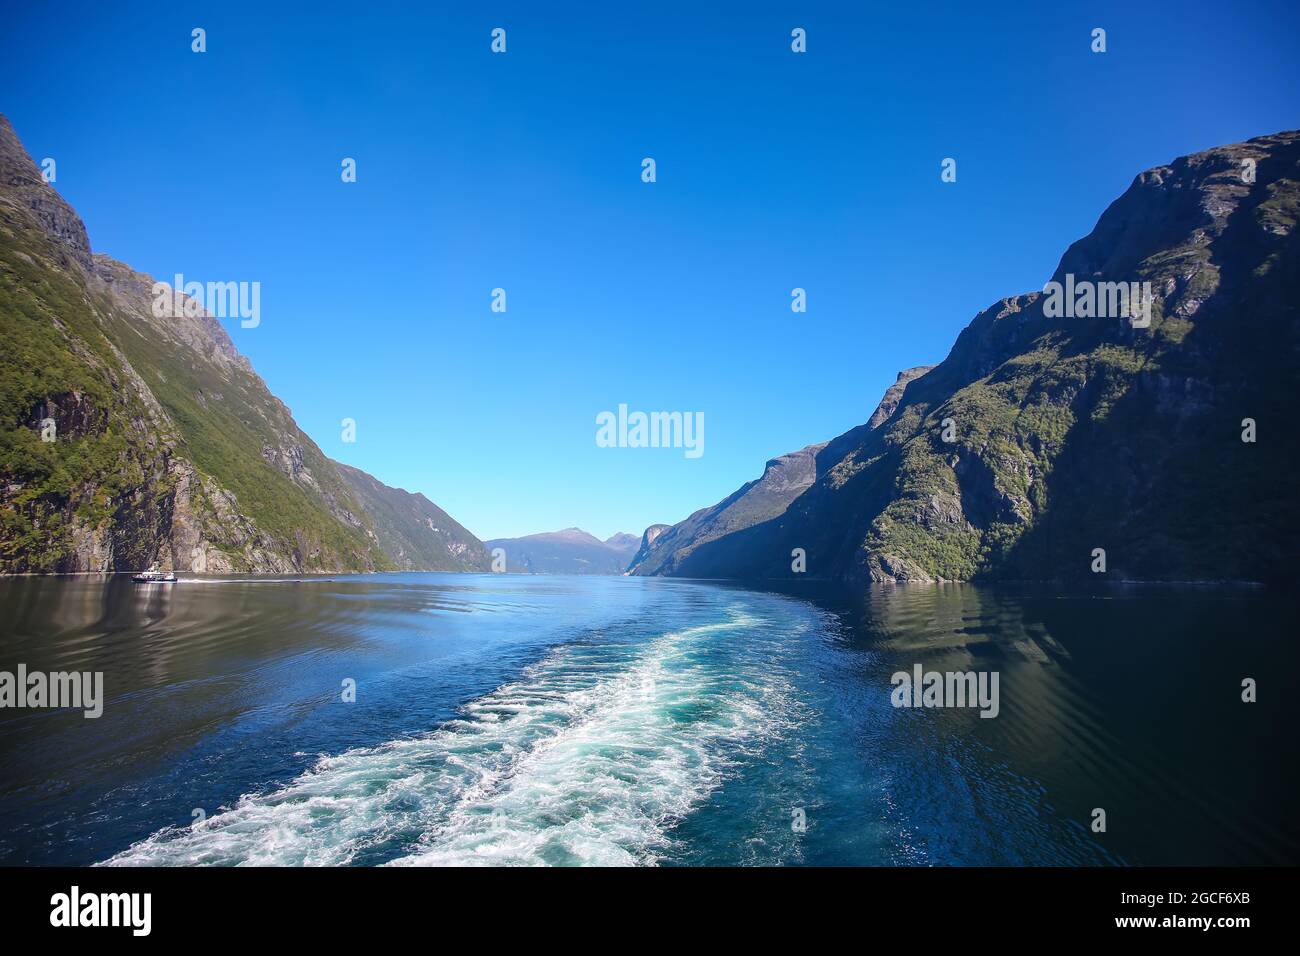 Wake of the ship while scenic cruising down Geiranger fjord. Beautiful landscape with cliffs and reflections of the mountains in the water, Norway. Stock Photo